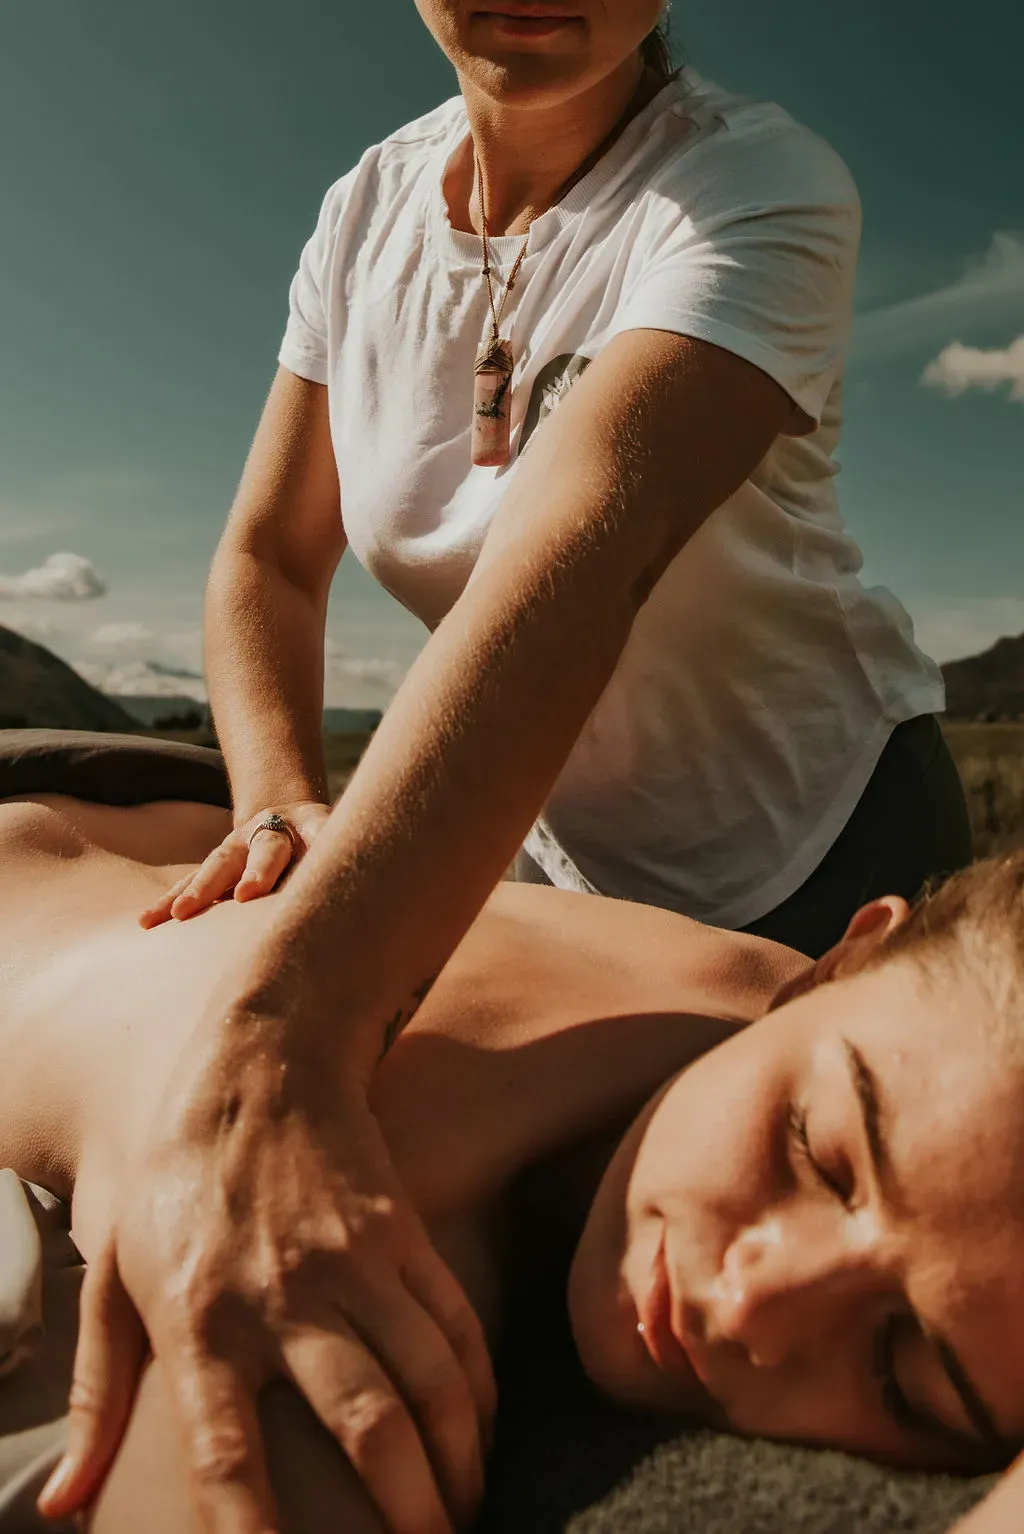 Smiling massage therapist using deep tissue technique with a client